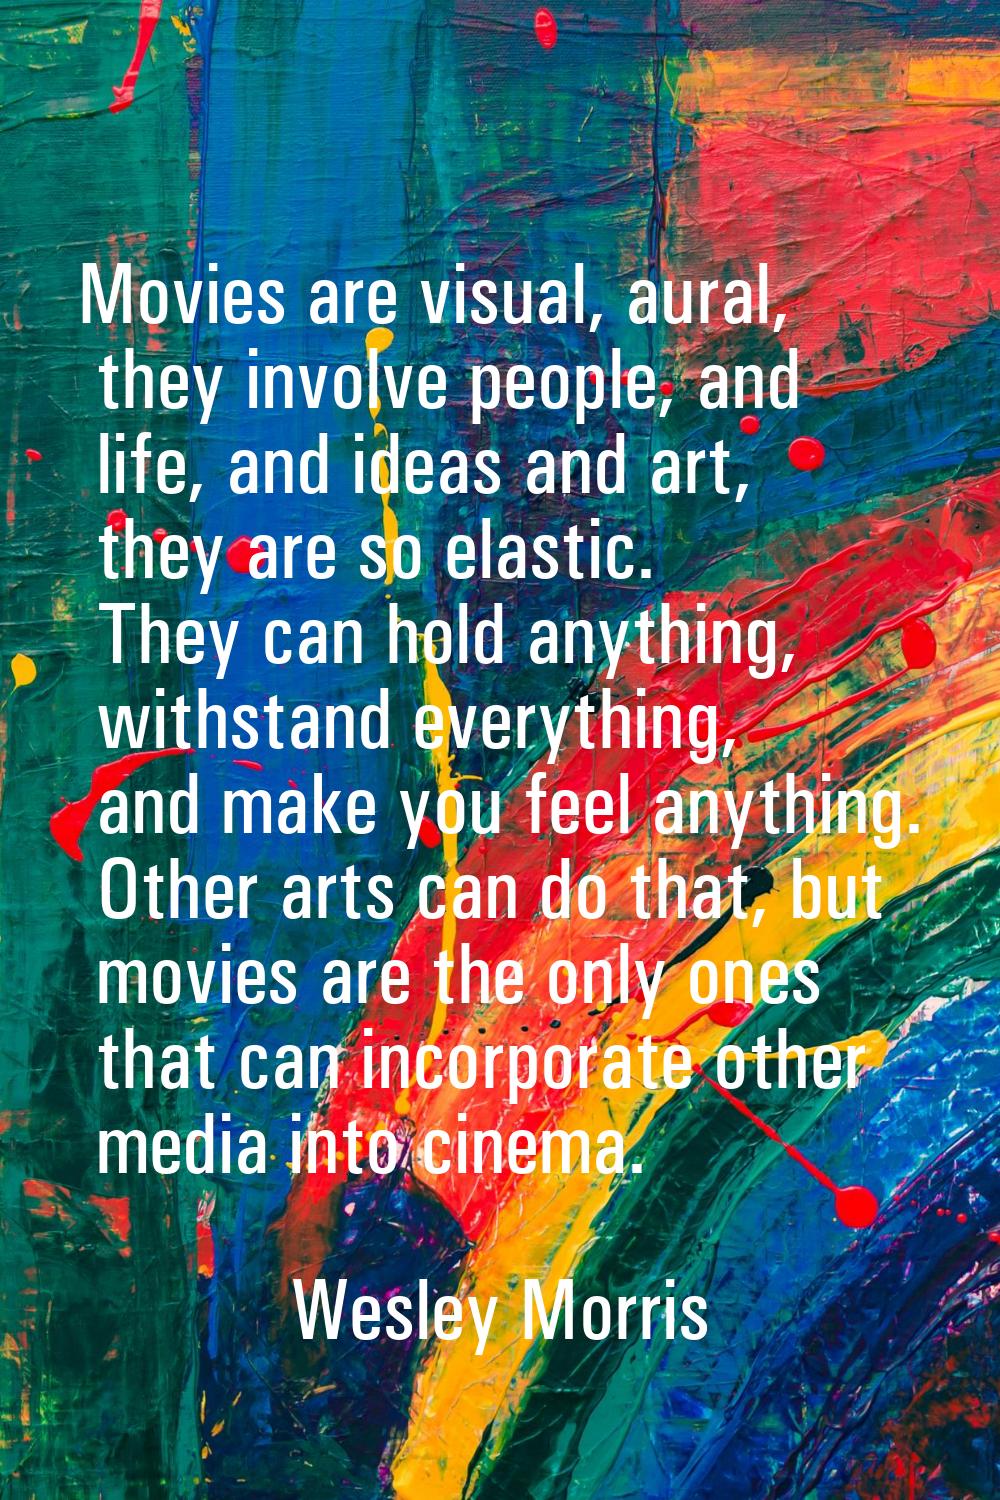 Movies are visual, aural, they involve people, and life, and ideas and art, they are so elastic. Th